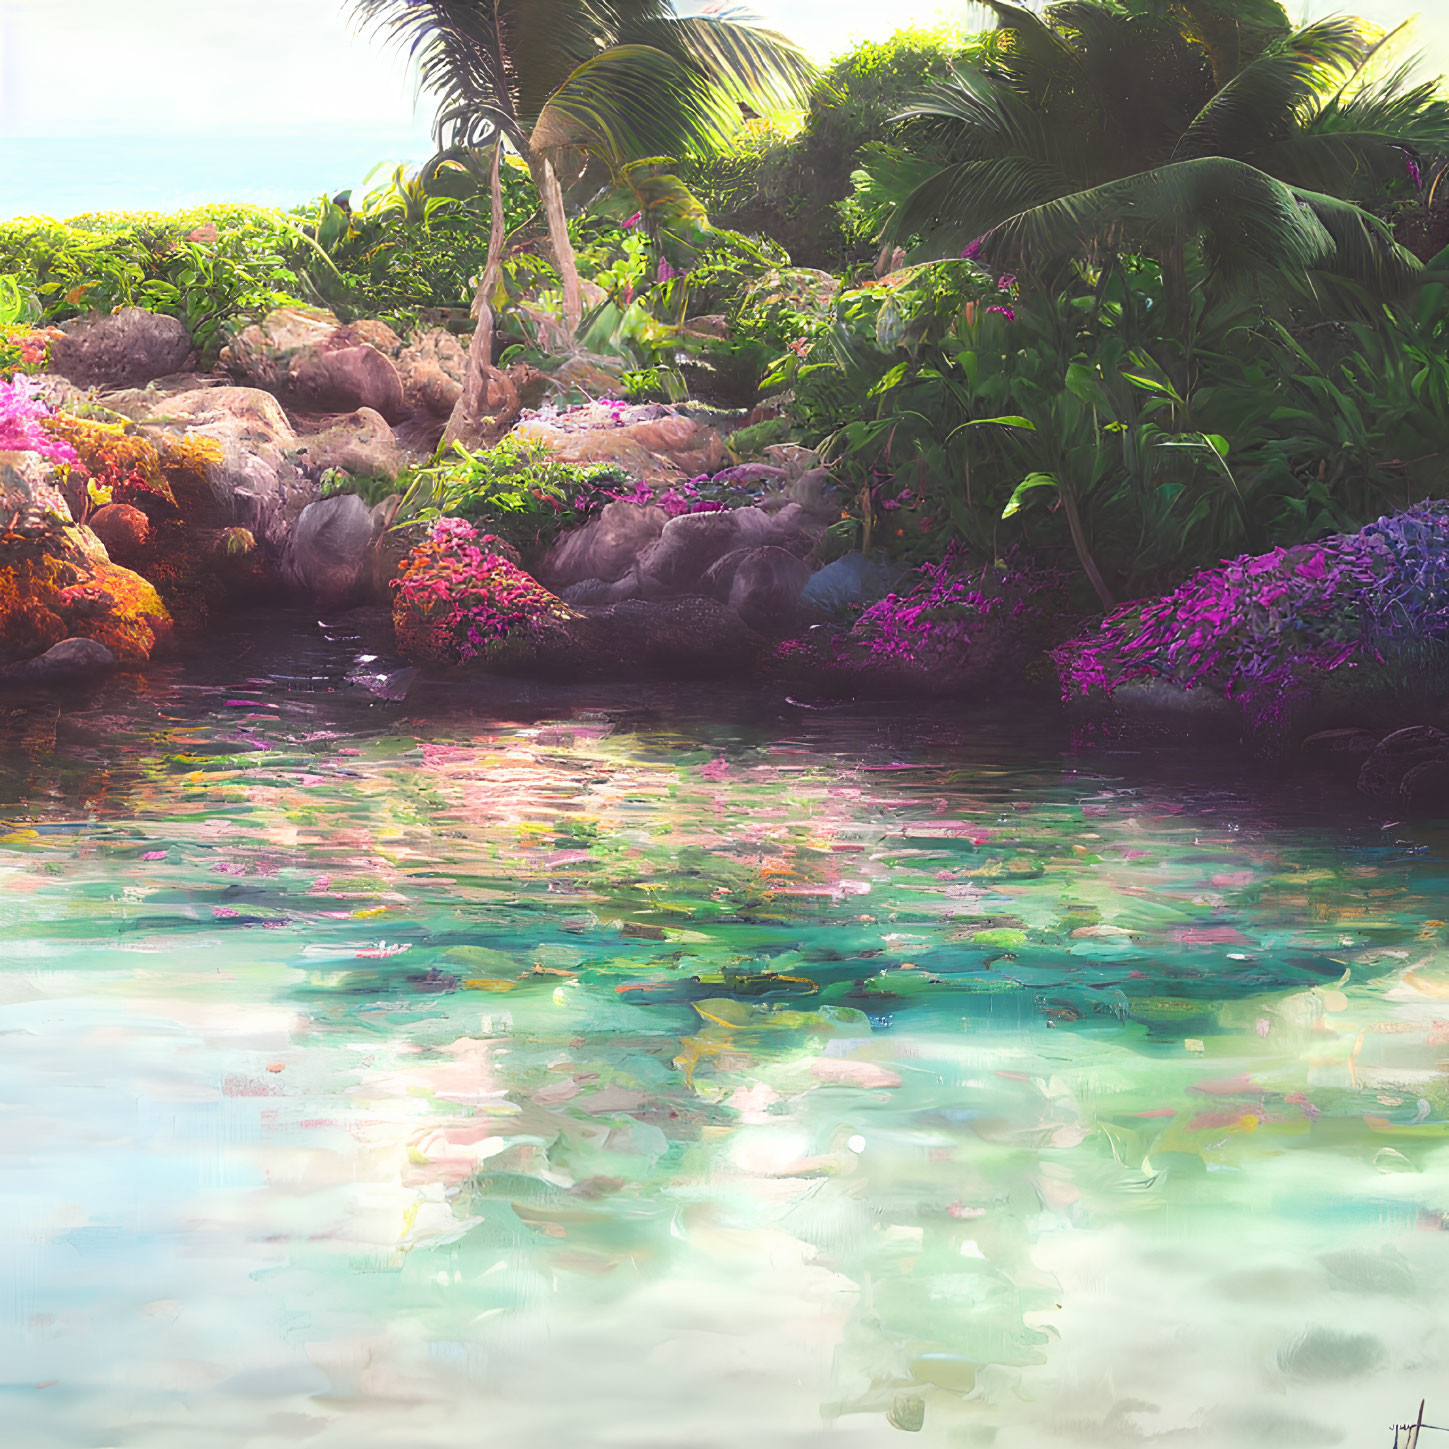 Tranquil Tropical Pond with Vibrant Flowers and Colorful Fish